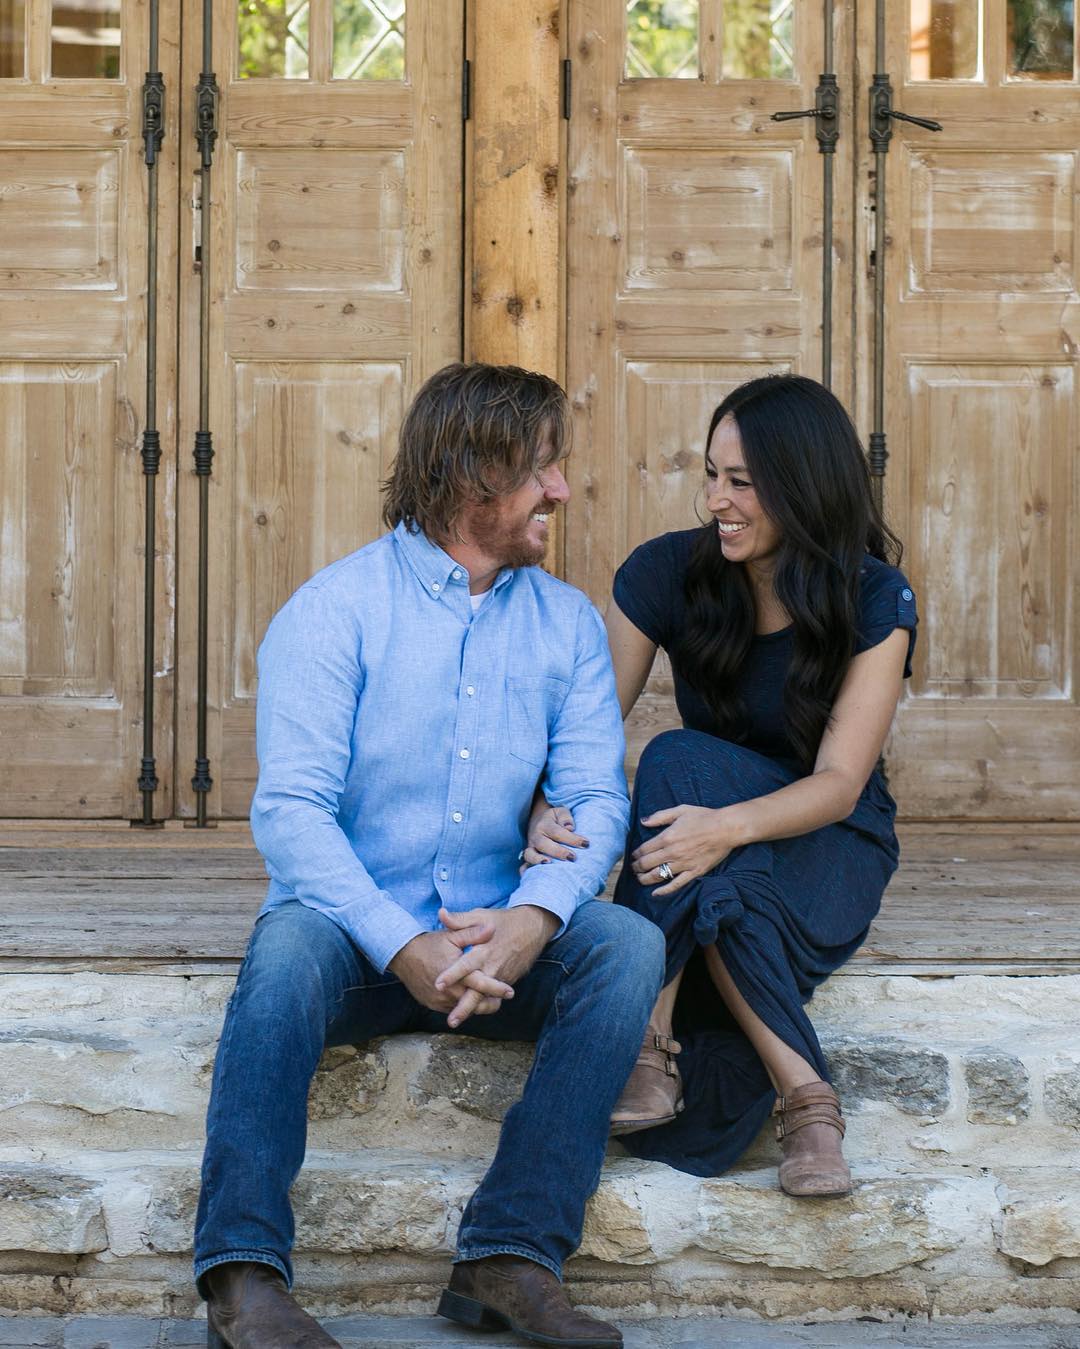 chip and joanna gaines sitting on steps looking at each other